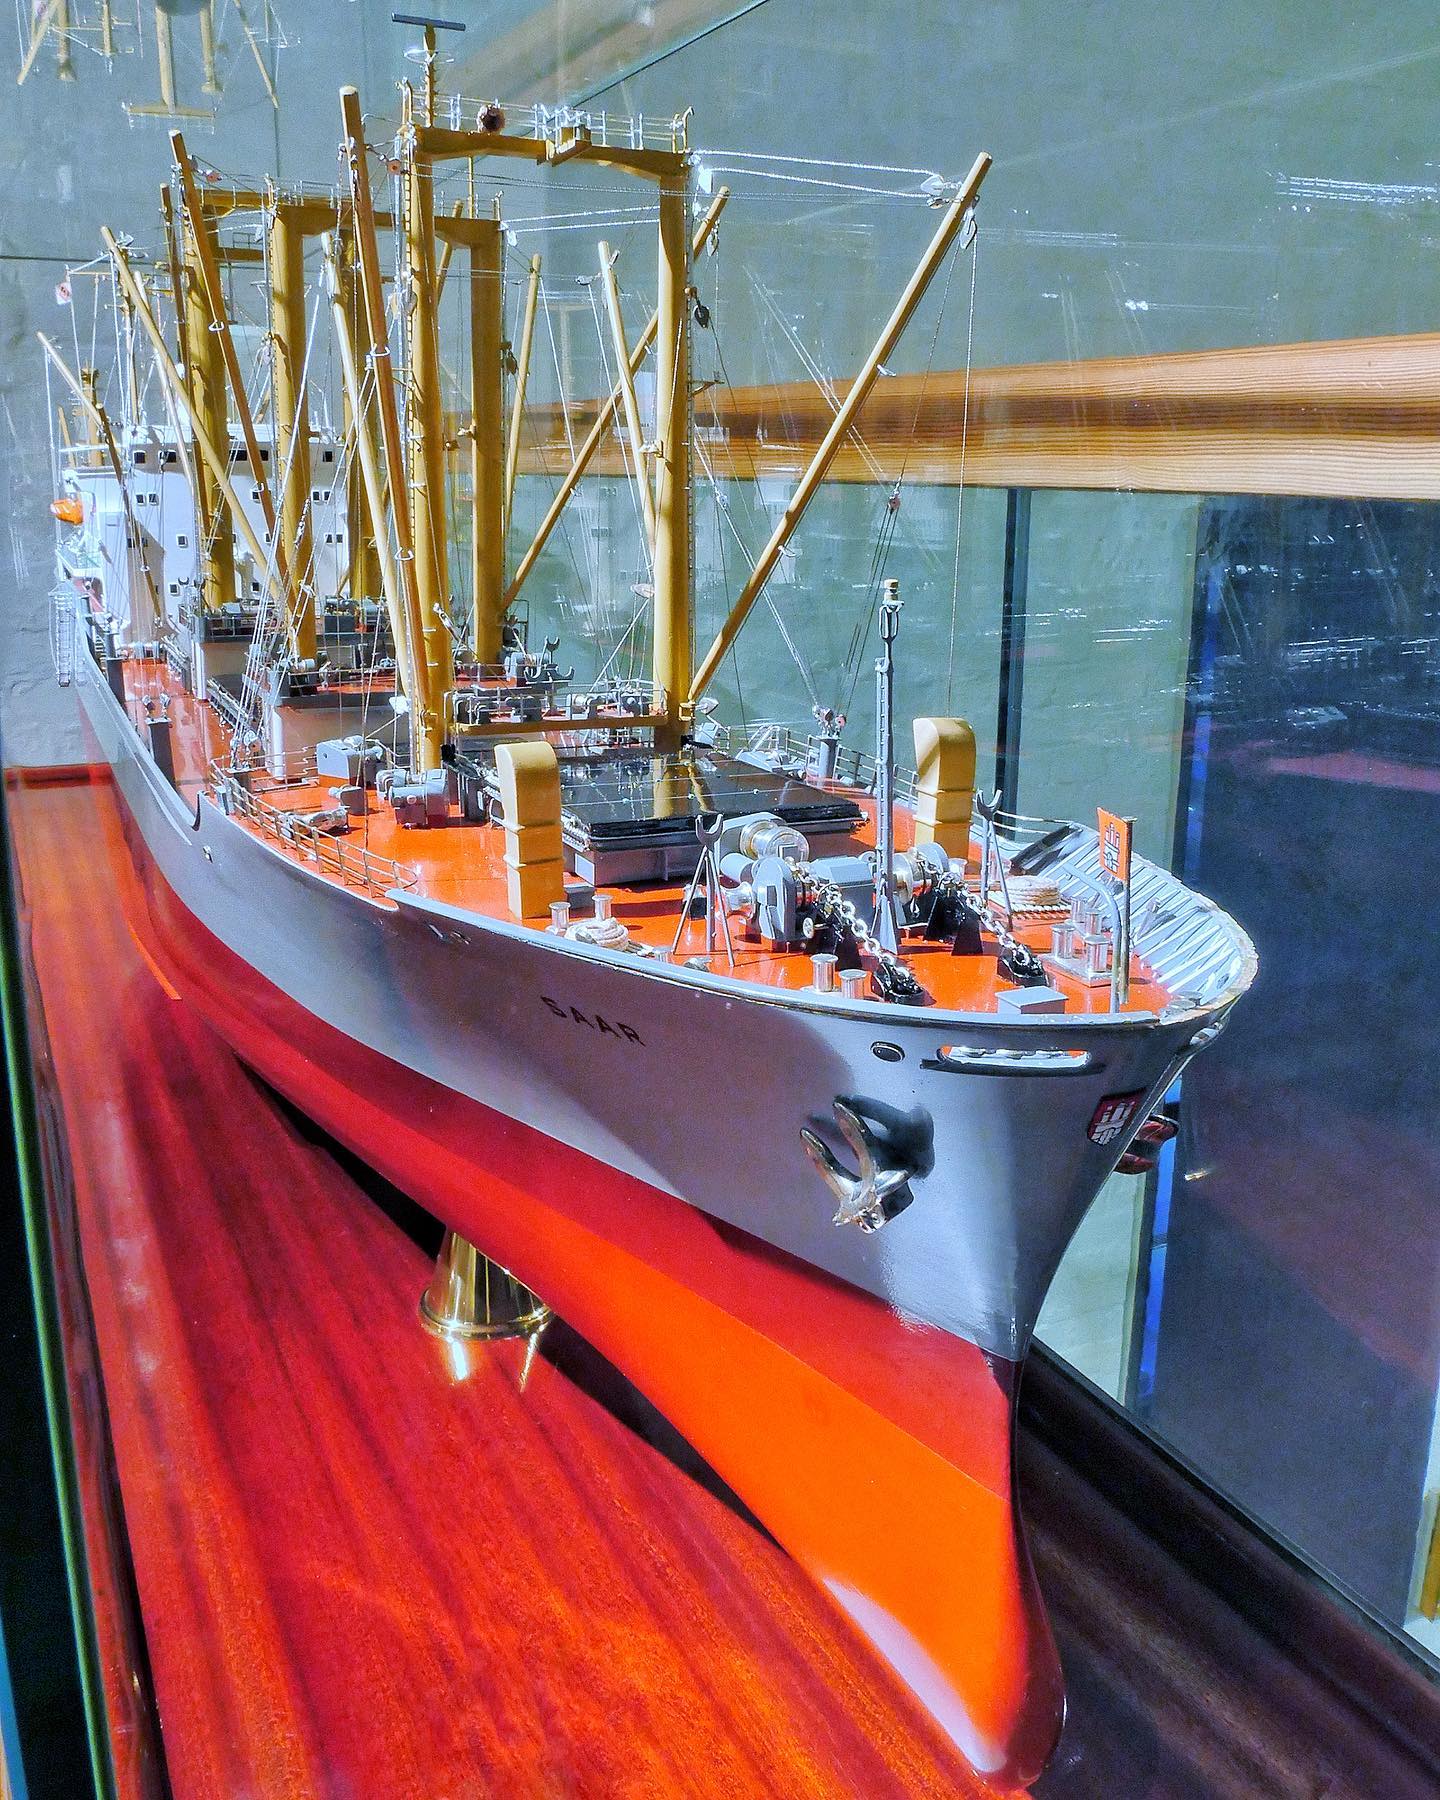 Heavy-duty general cargo ship Saar. This magnificent yard model is part of a larger permanent loan of objects from the Hamburg shipping company Friedrich A. Detjen.